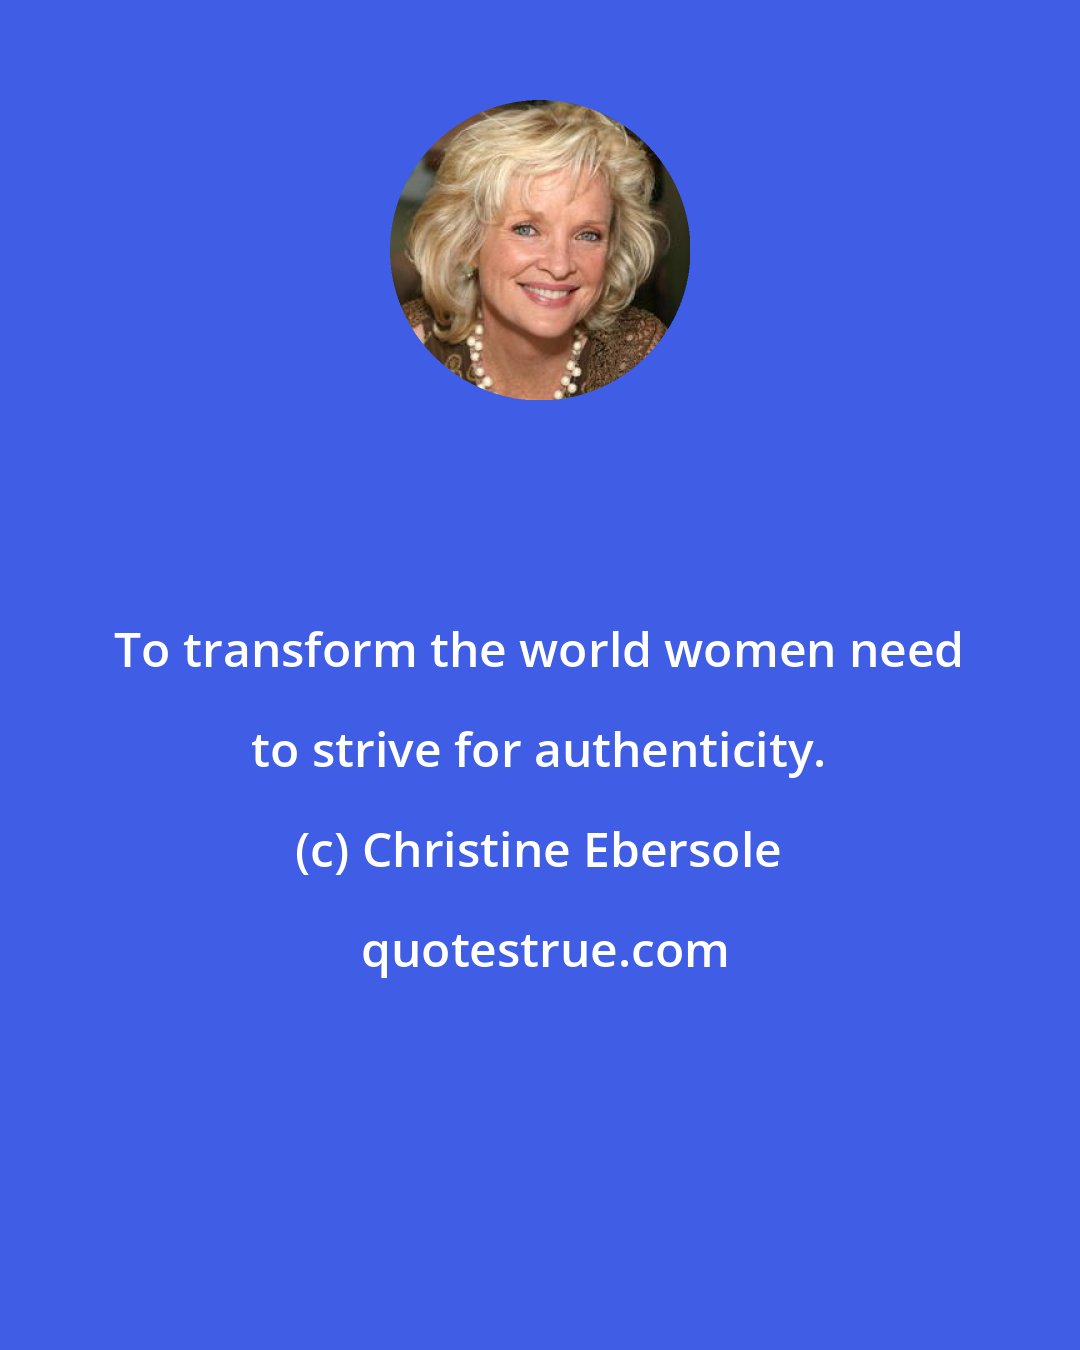 Christine Ebersole: To transform the world women need to strive for authenticity.